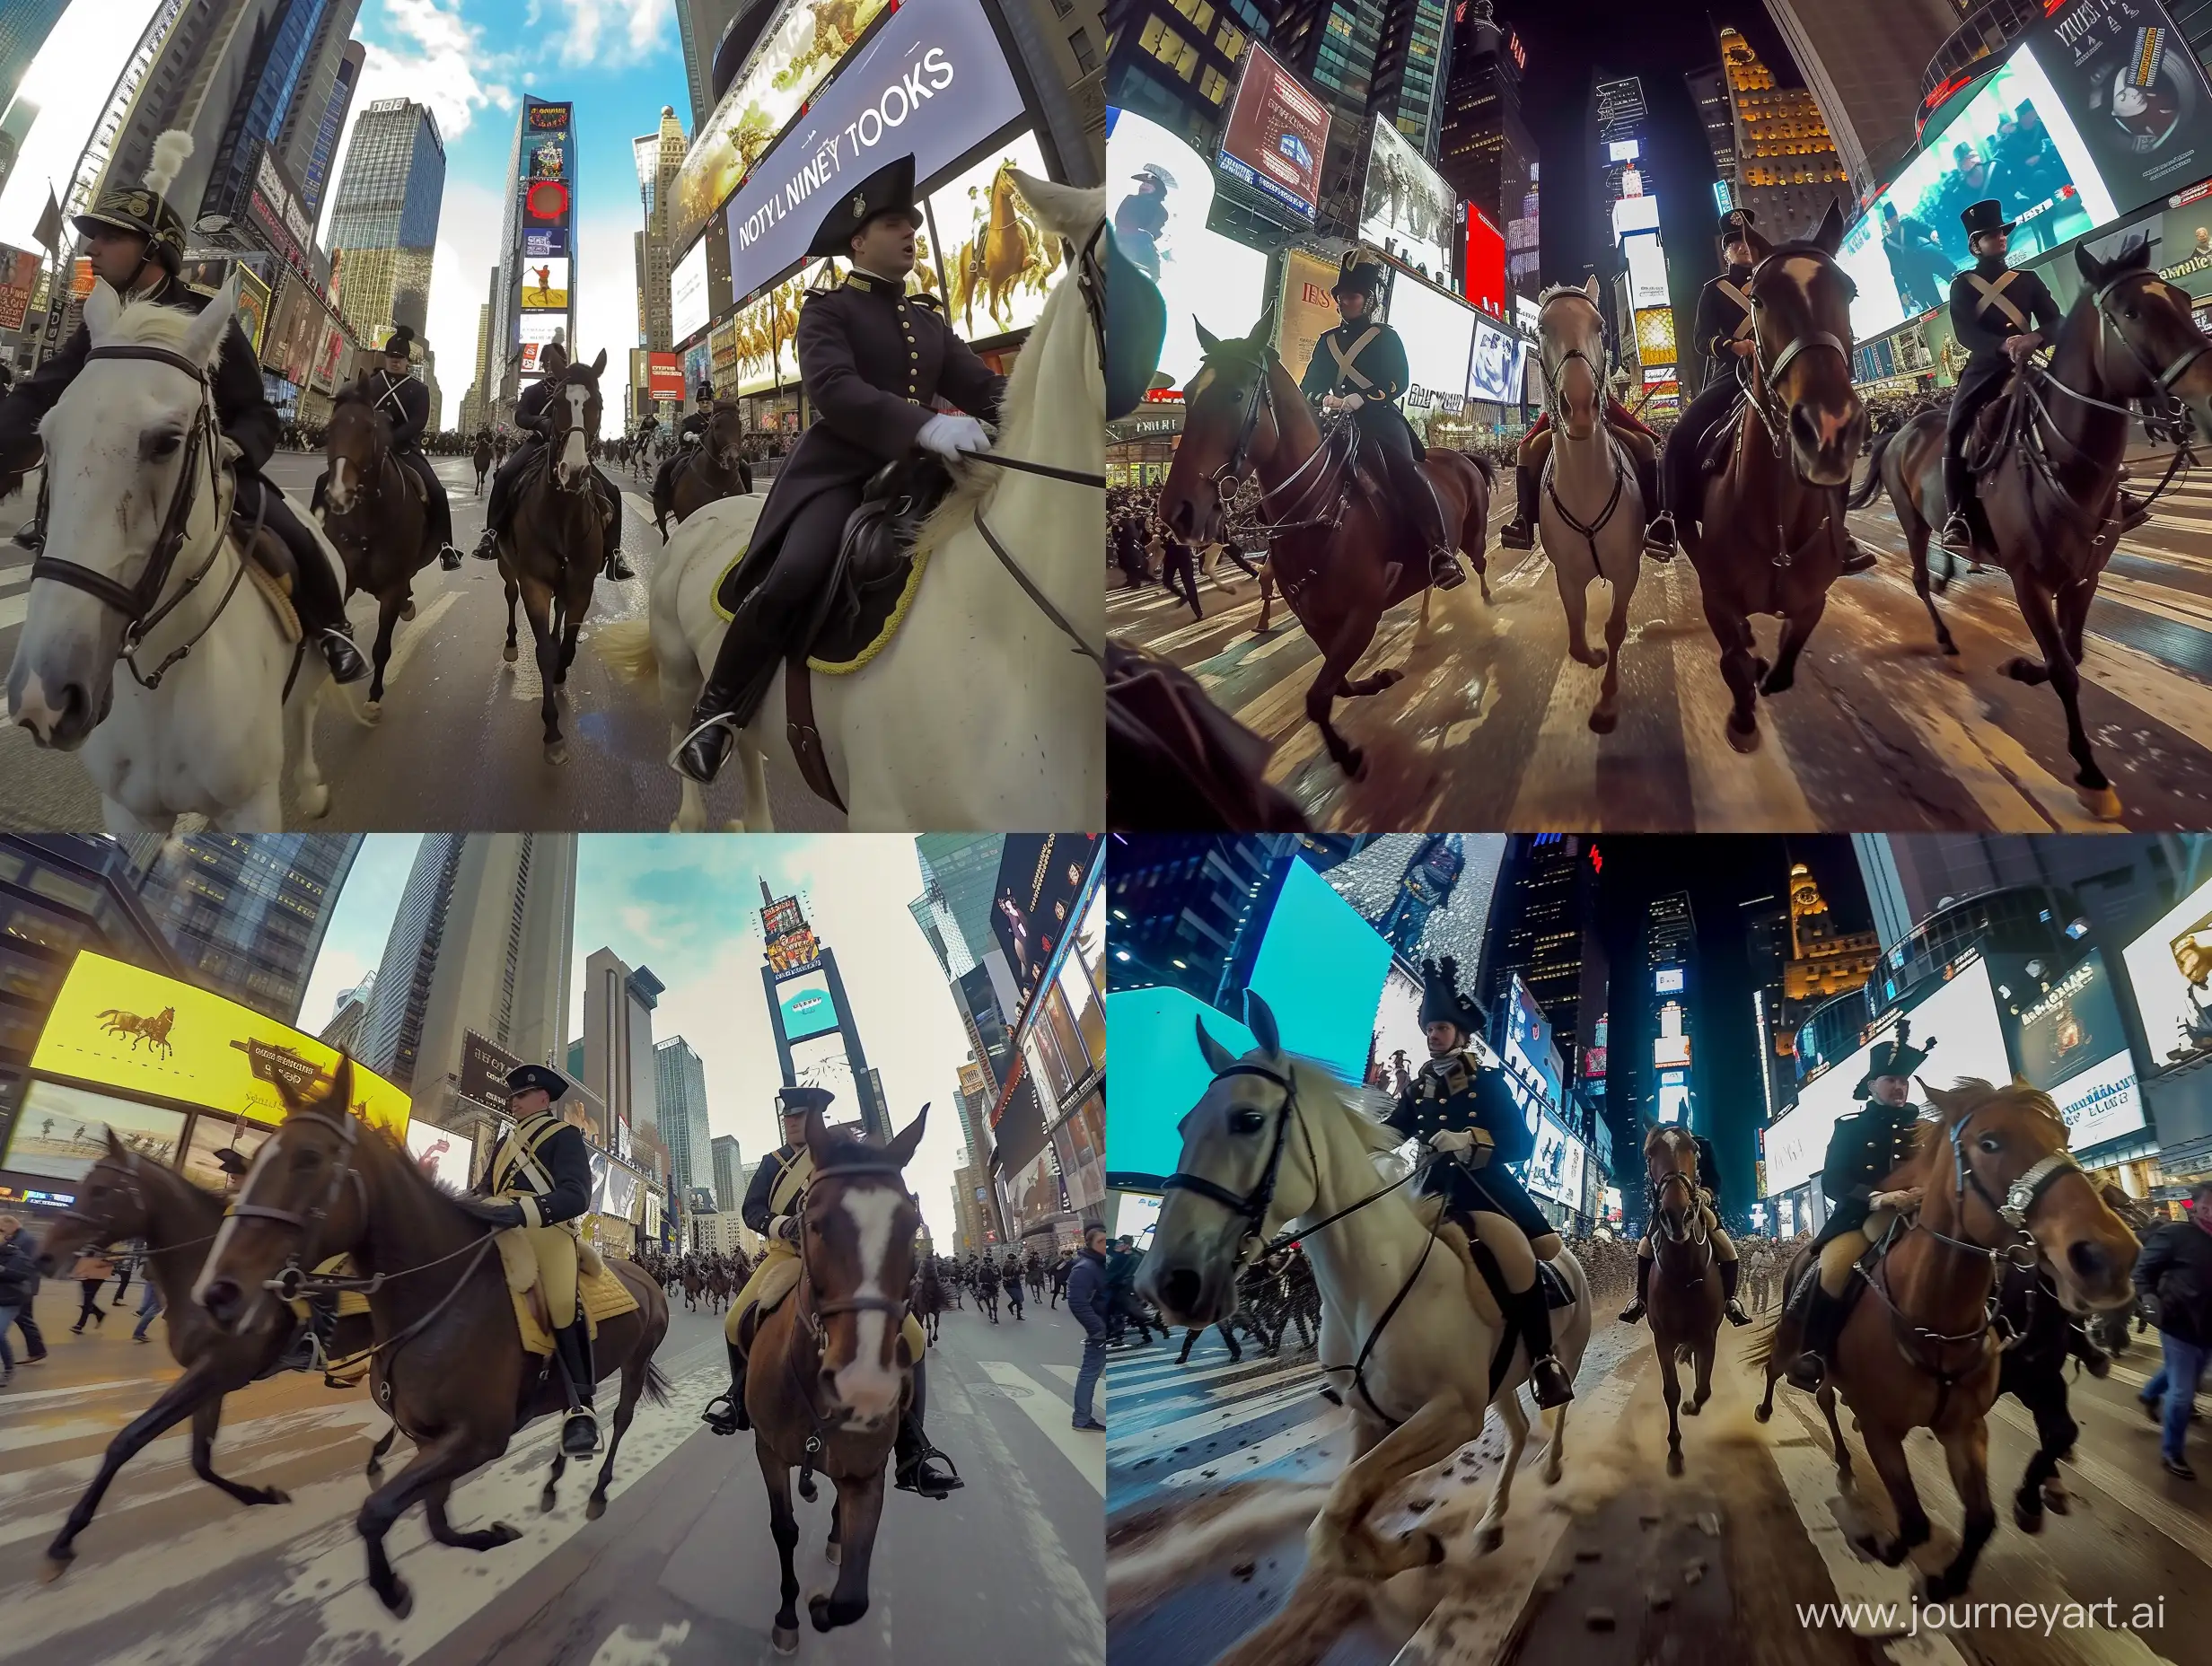 gopro footage of napoleonic cavalry storming through times square on horseback, pov, civillians running away in fear, horses running